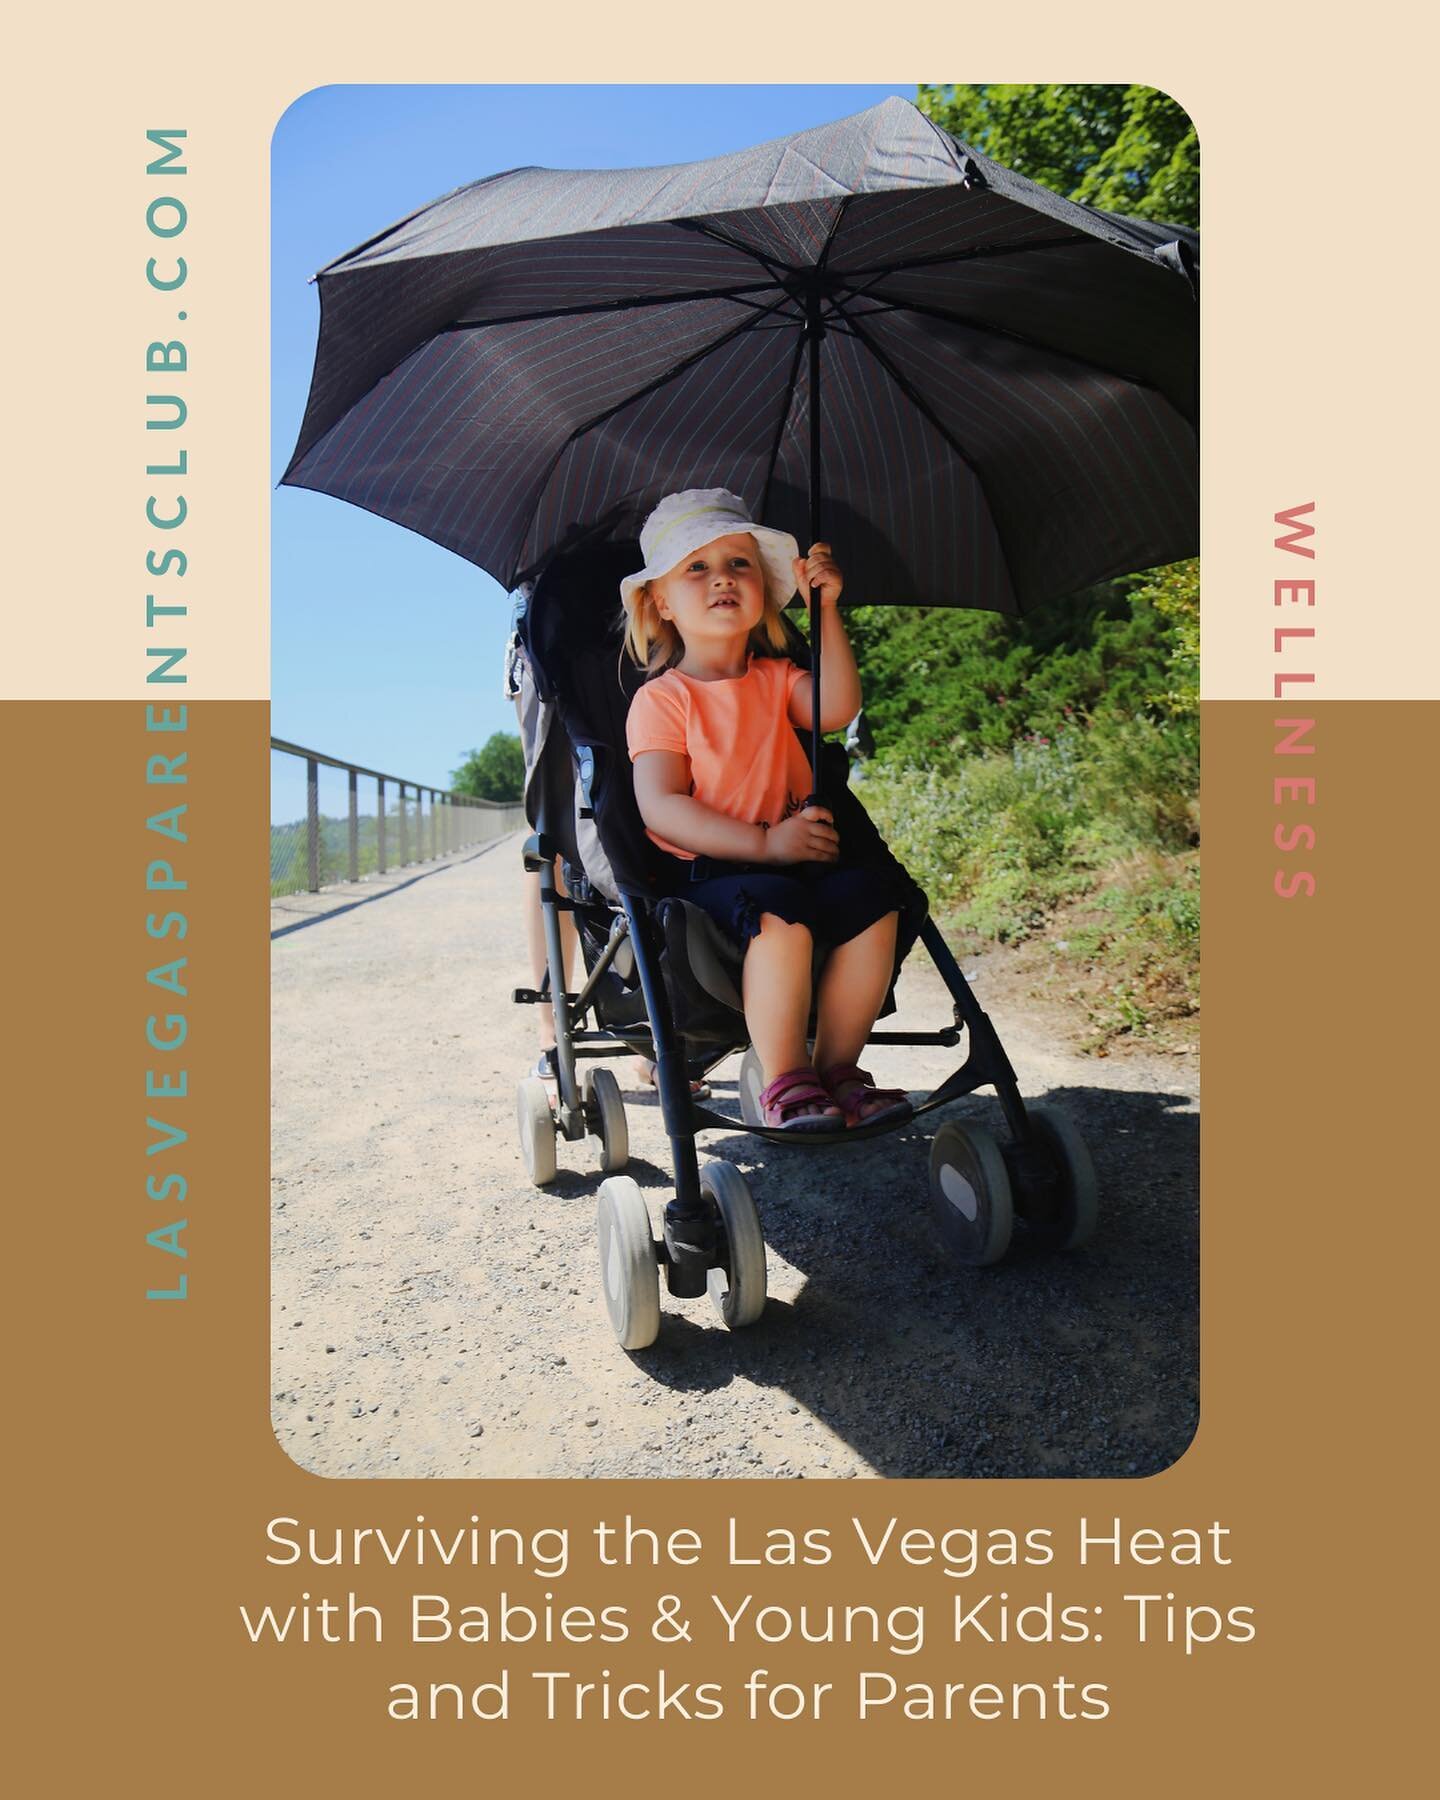 WELLNESS // Surviving the Las Vegas Heat w/ Babies &amp; Young Kids: Tips and Tricks for Parents

☀️🥵With Las Vegas temperatures routinely soaring over 100 degrees, it's crucial to be well-prepared to ensure the safety and comfort of your little one